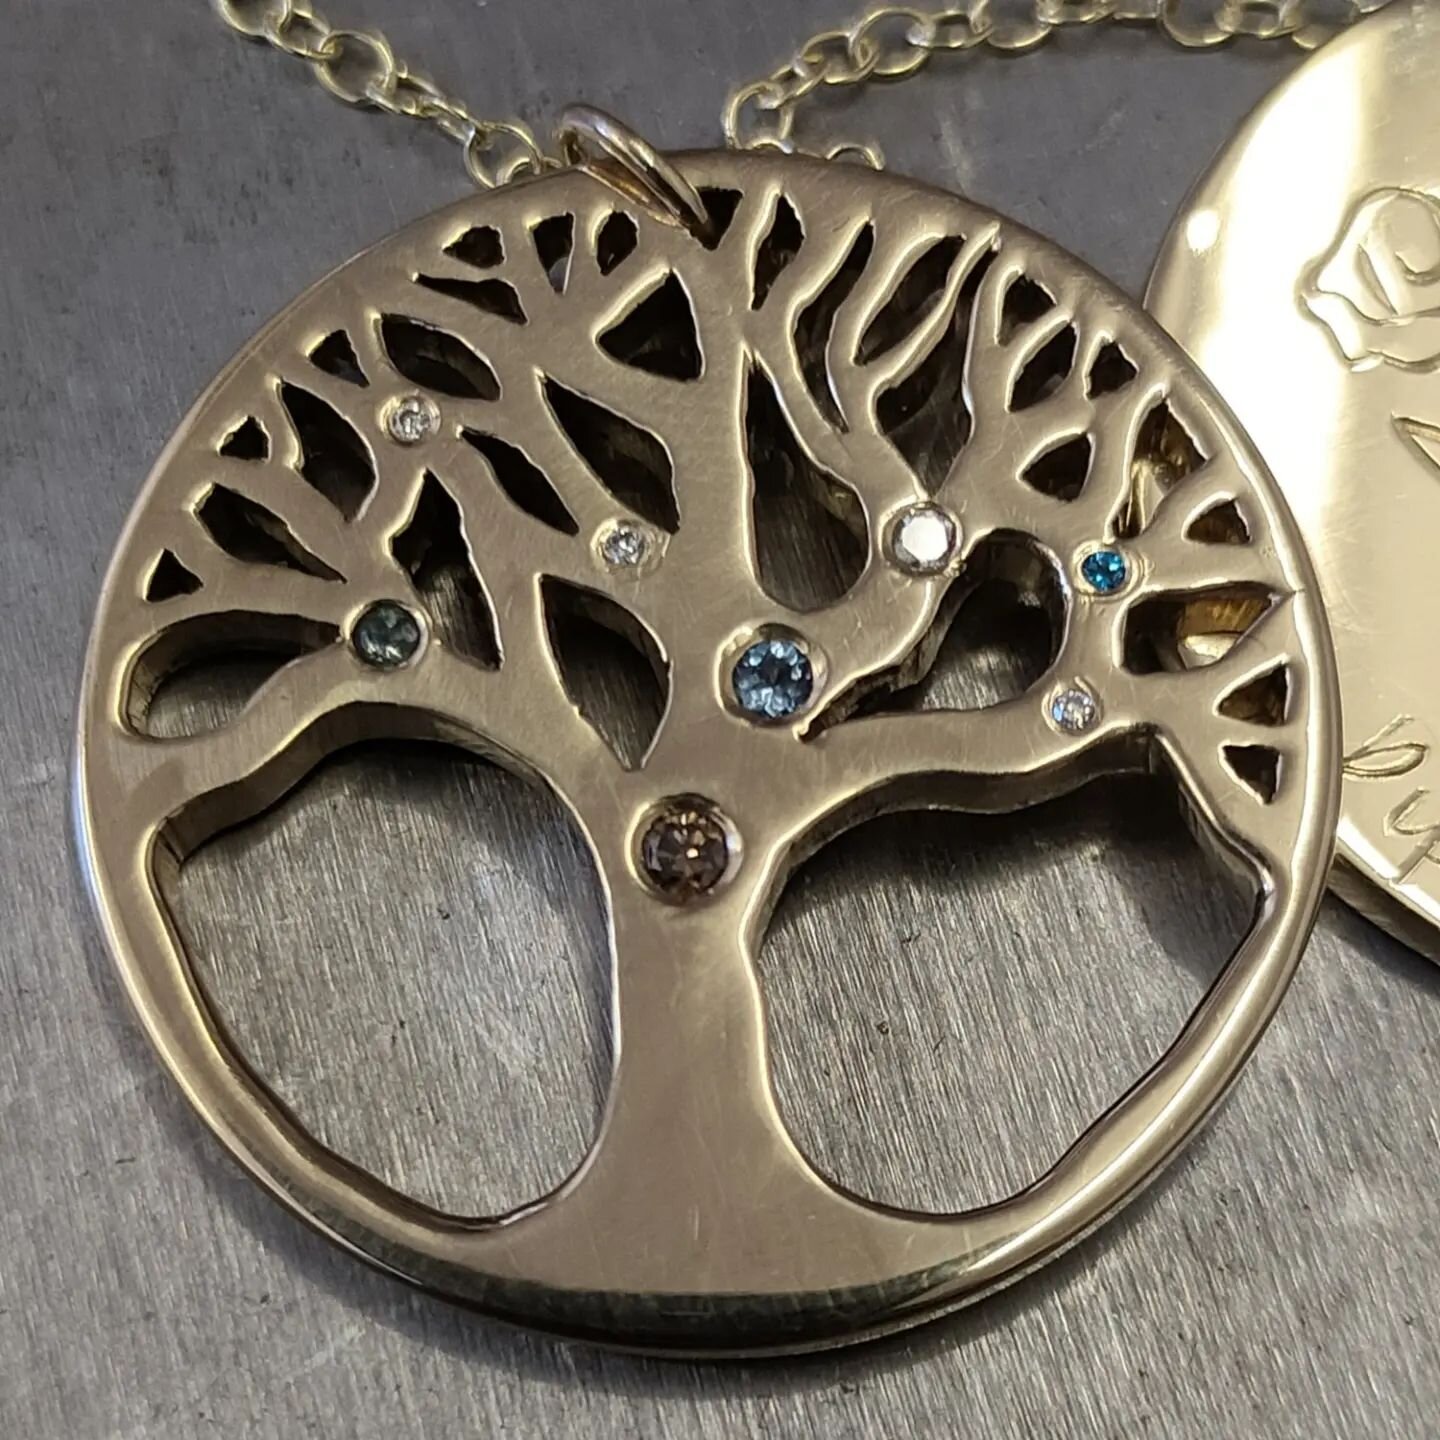 This commission for the lovely @zoetrott10 took some time to make. But it was such a pleasure to work with such an amazing lady. And - she loves it. Phew! 
#sarahreecejewellery #gold #gems #treeoflife #9ct #diamond #aquamarine #topaz #alexandrite #de